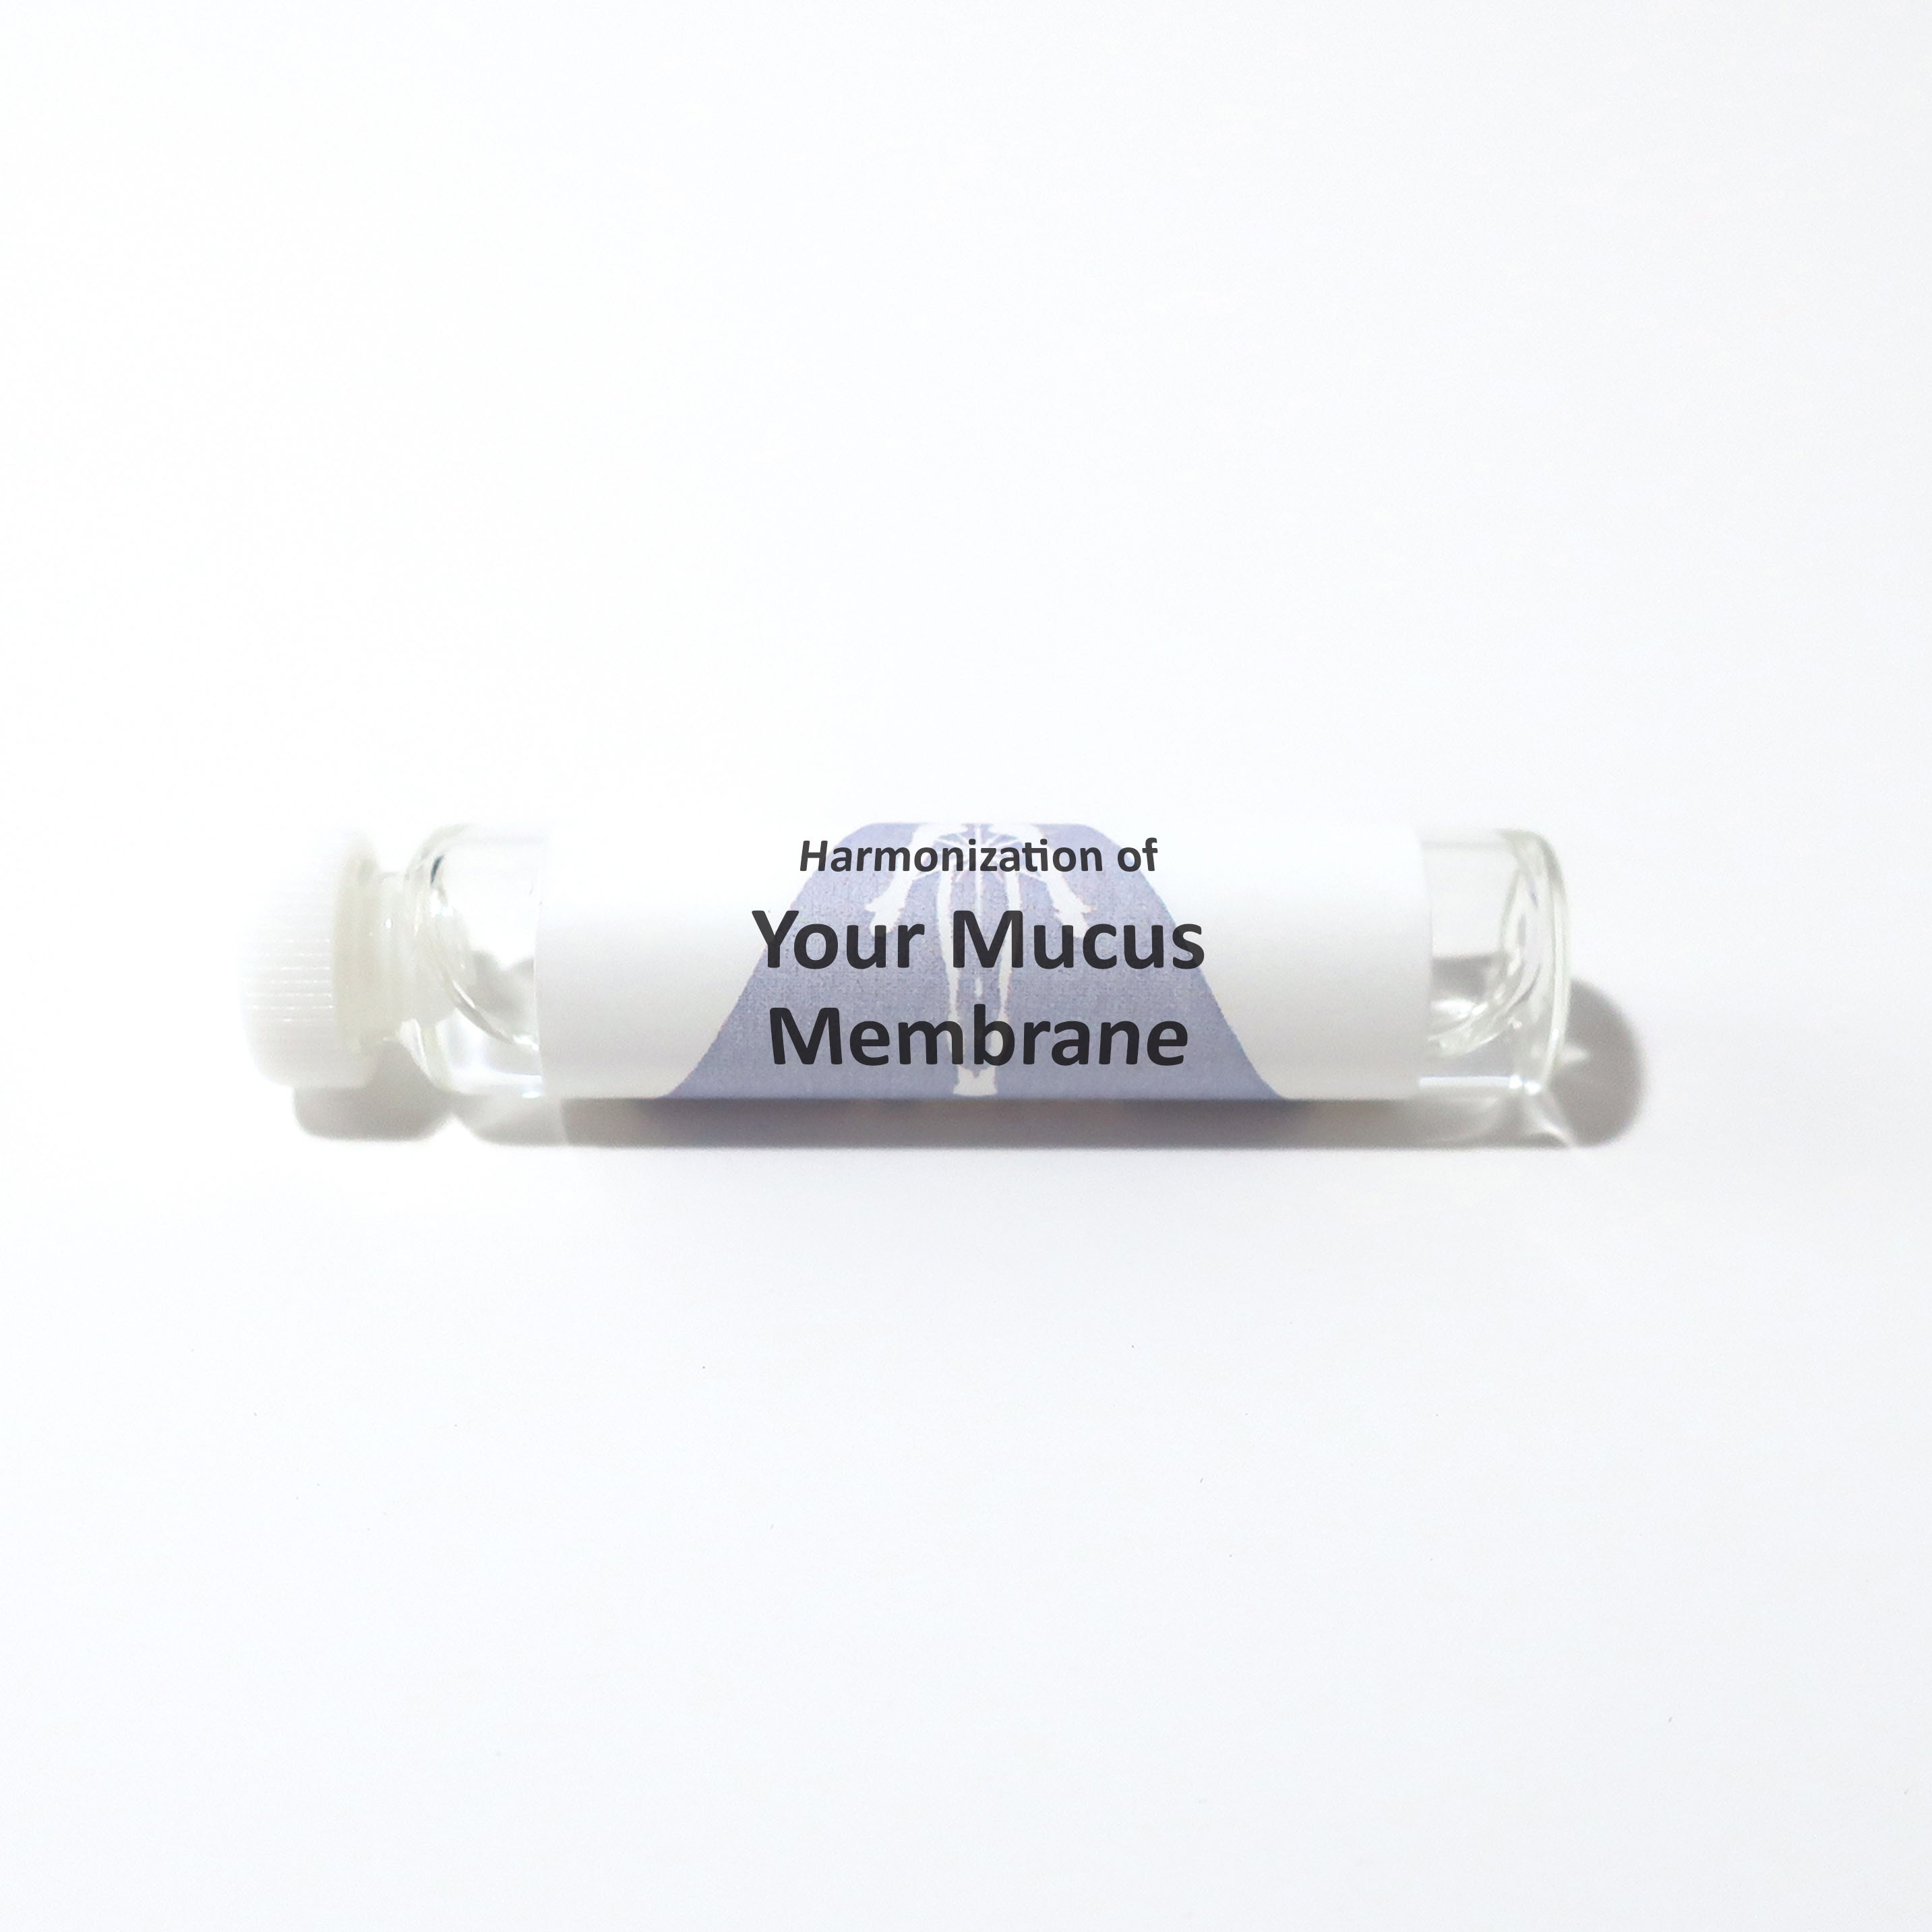 Your Mucus Membrane